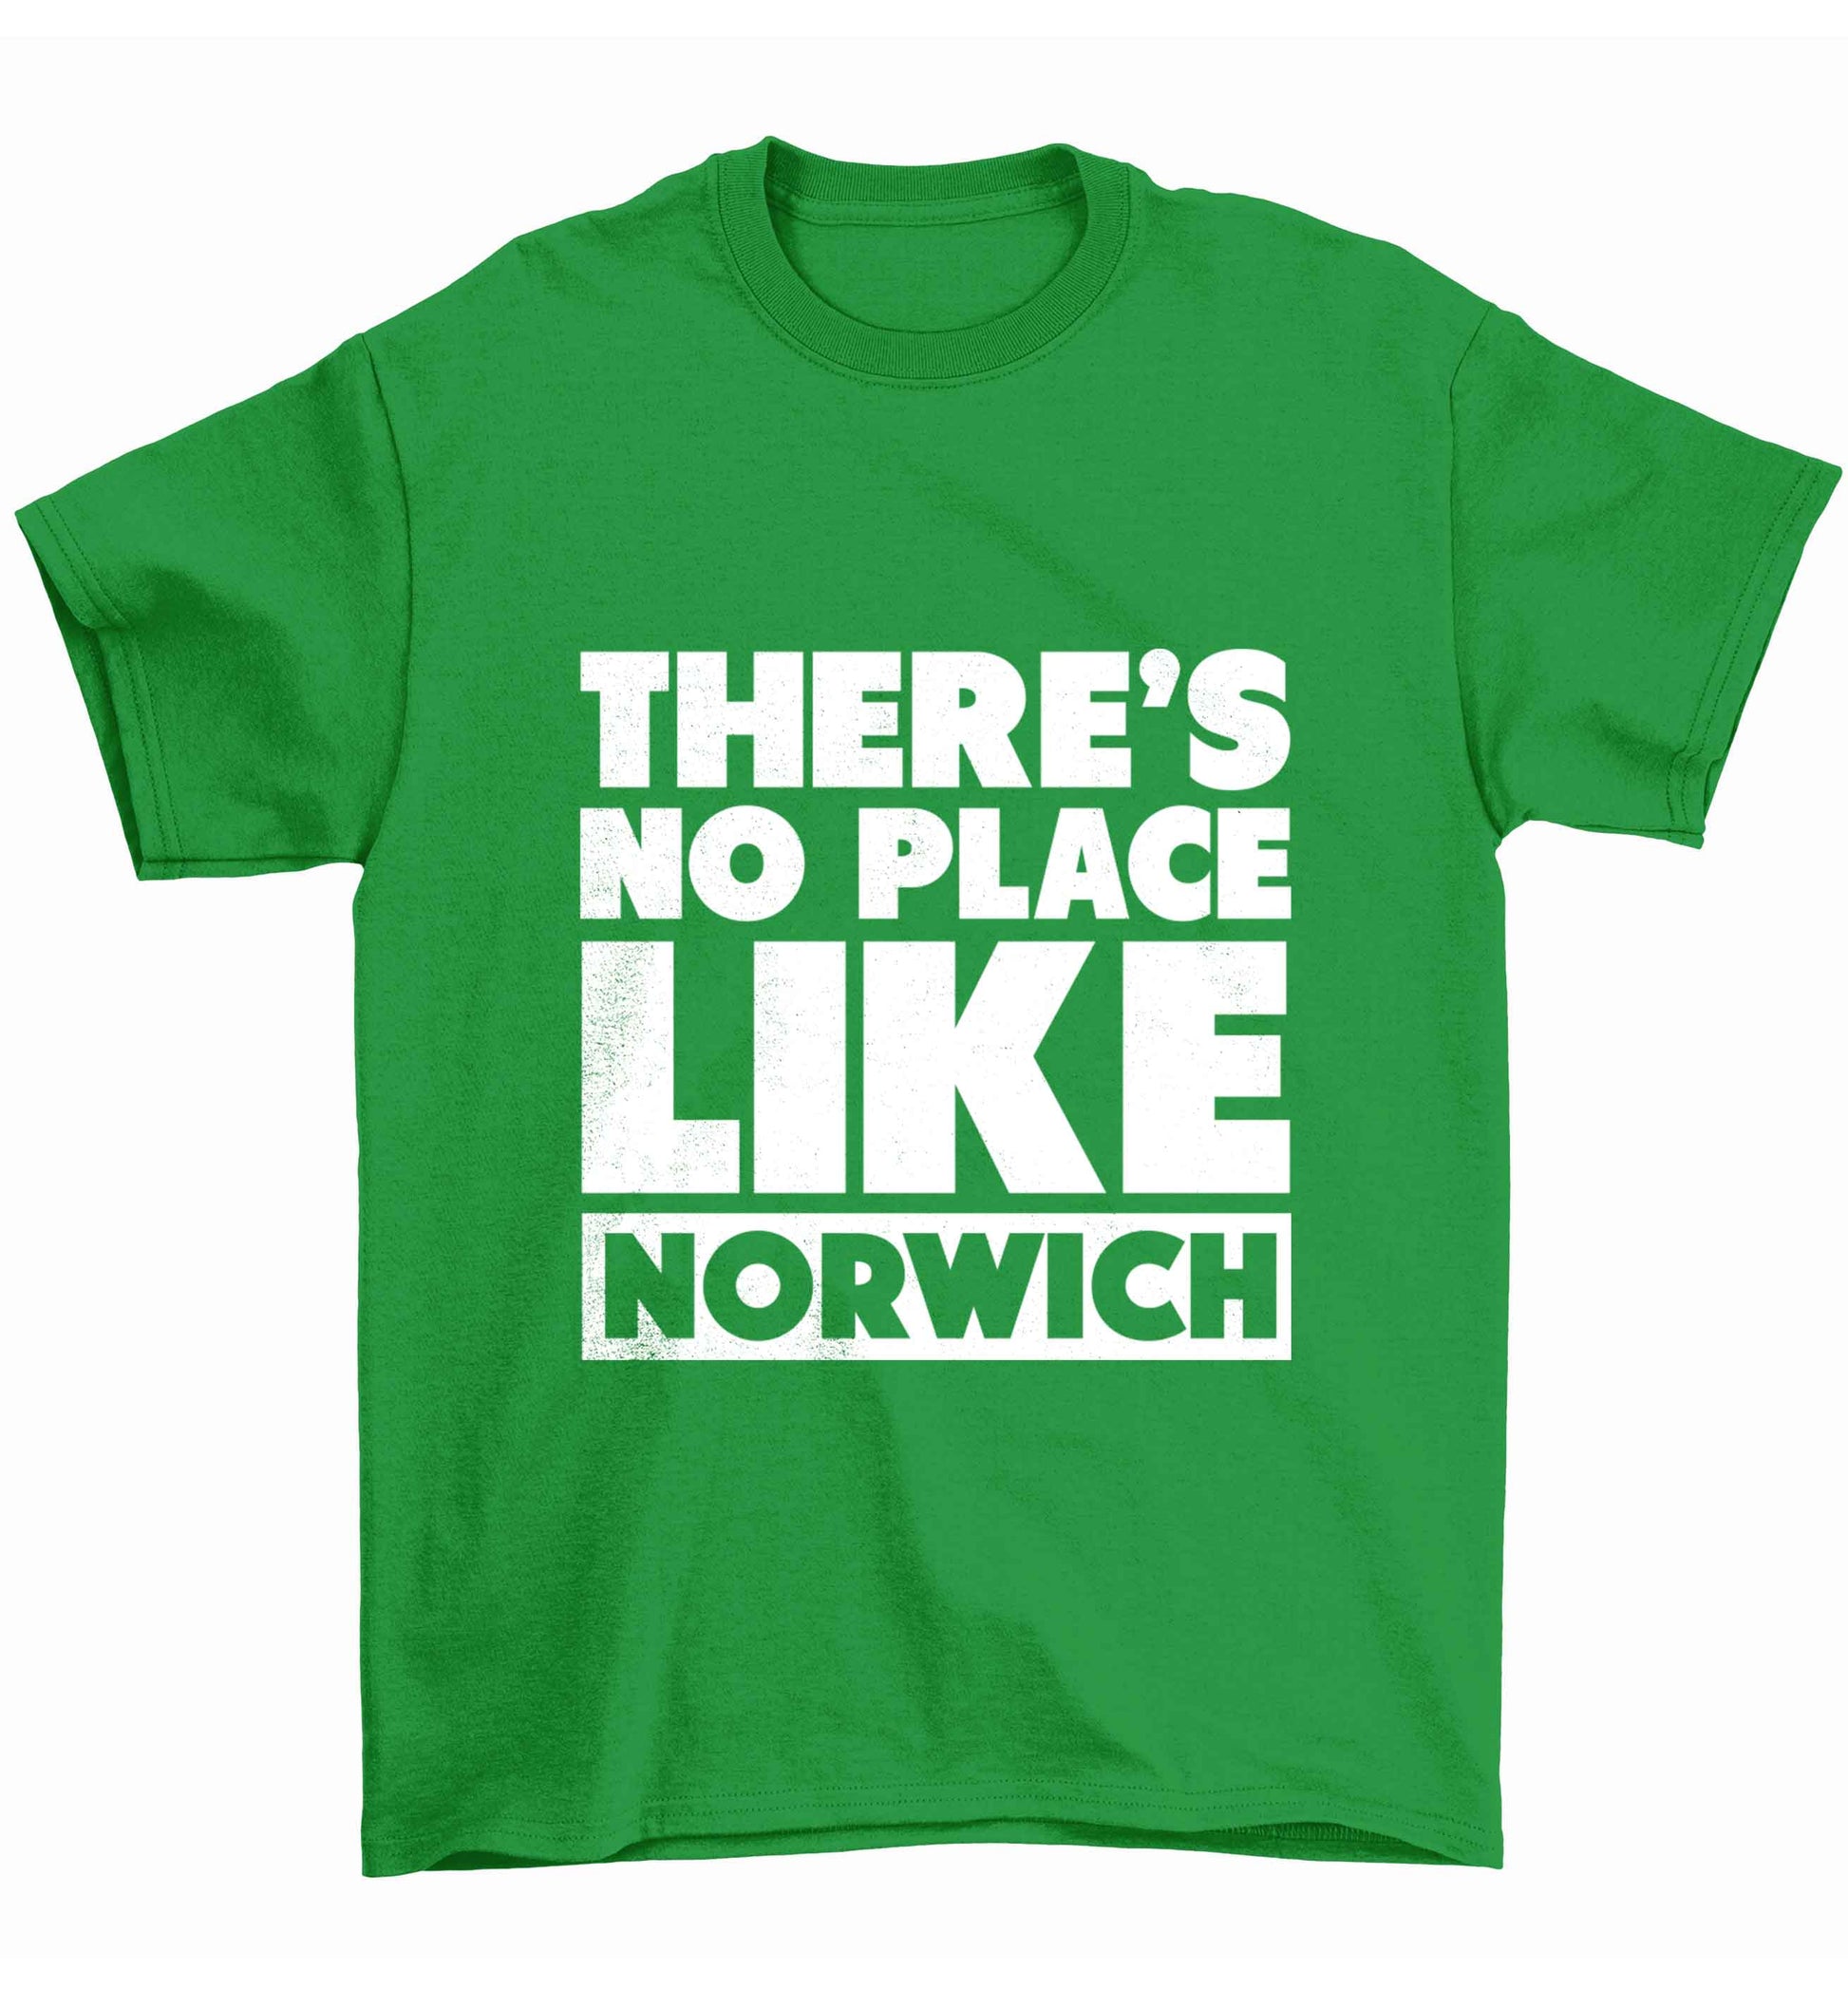 There's no place like Norwich Children's green Tshirt 12-13 Years